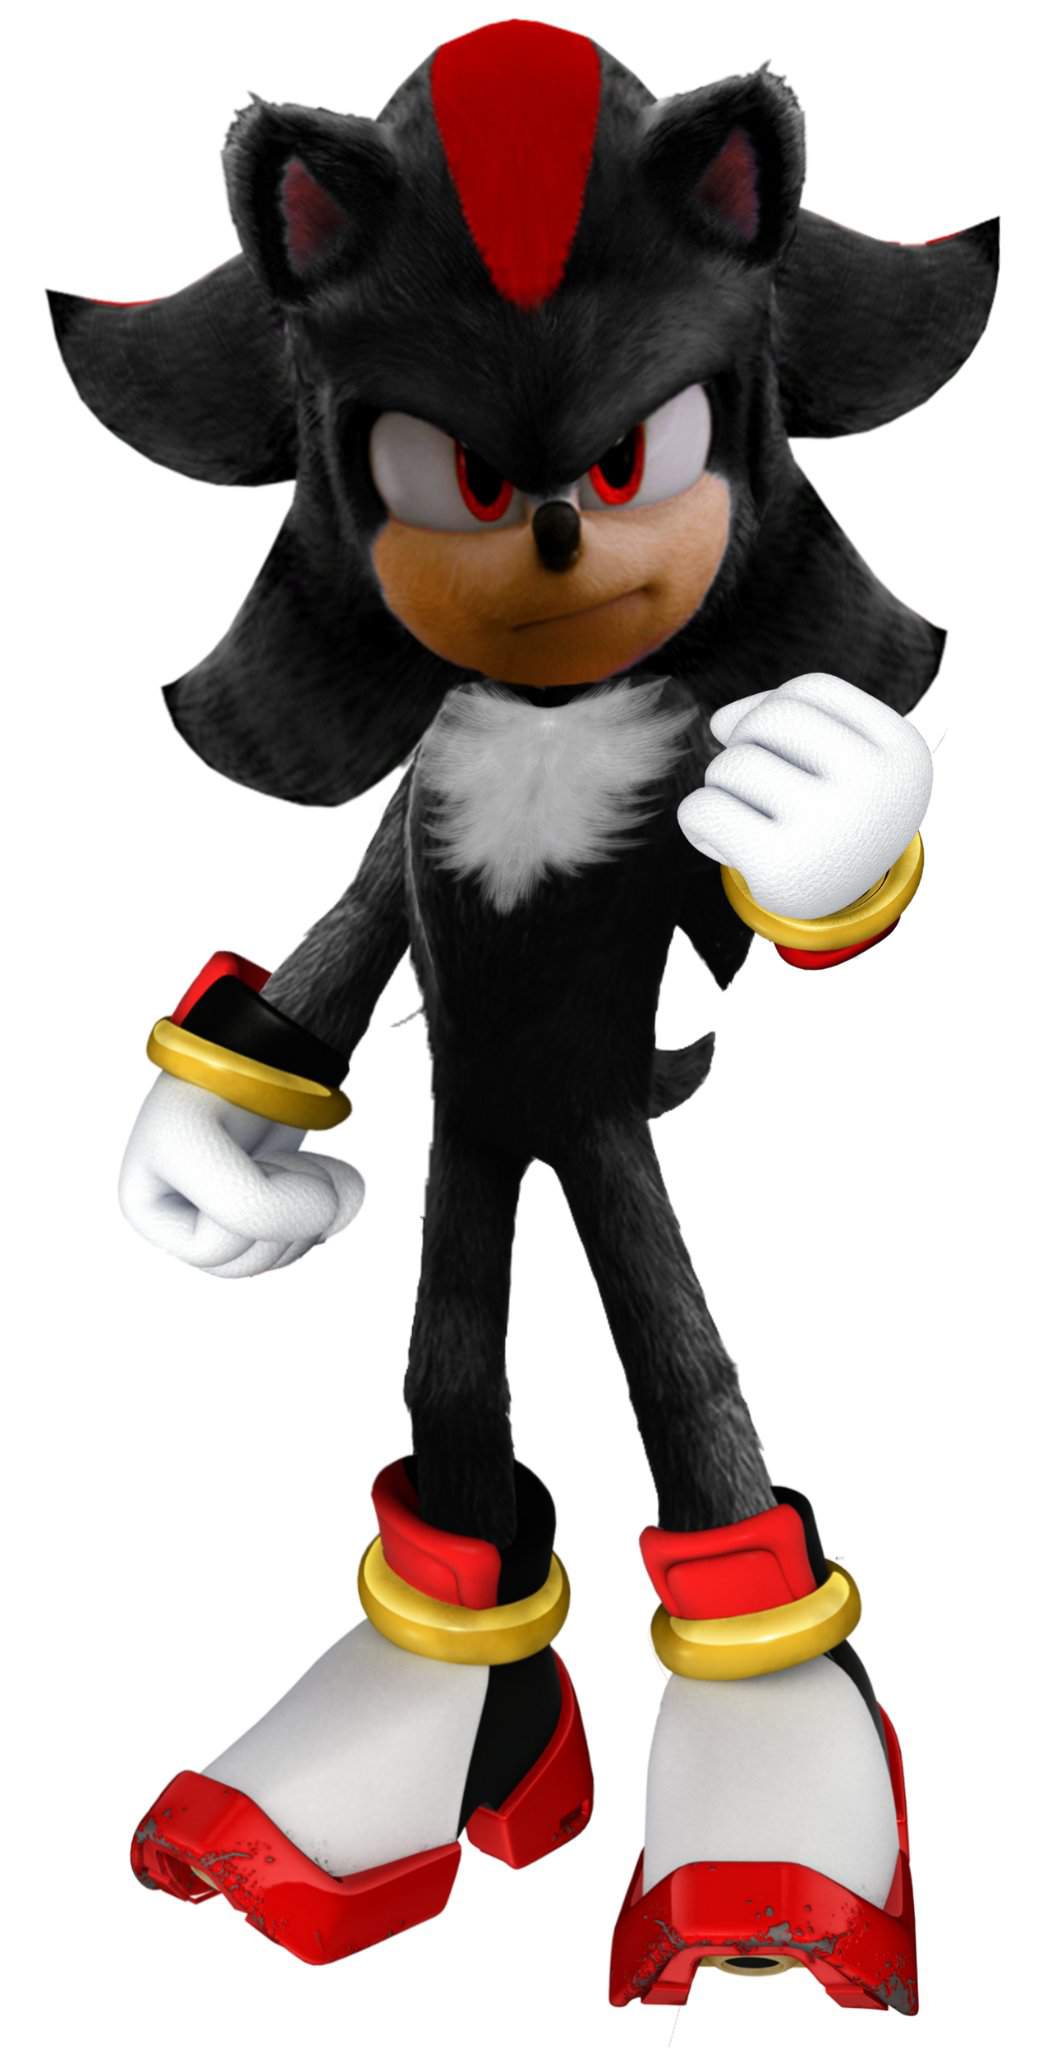 Who should voice movie Shadow? Sonic the Hedgehog! Amino